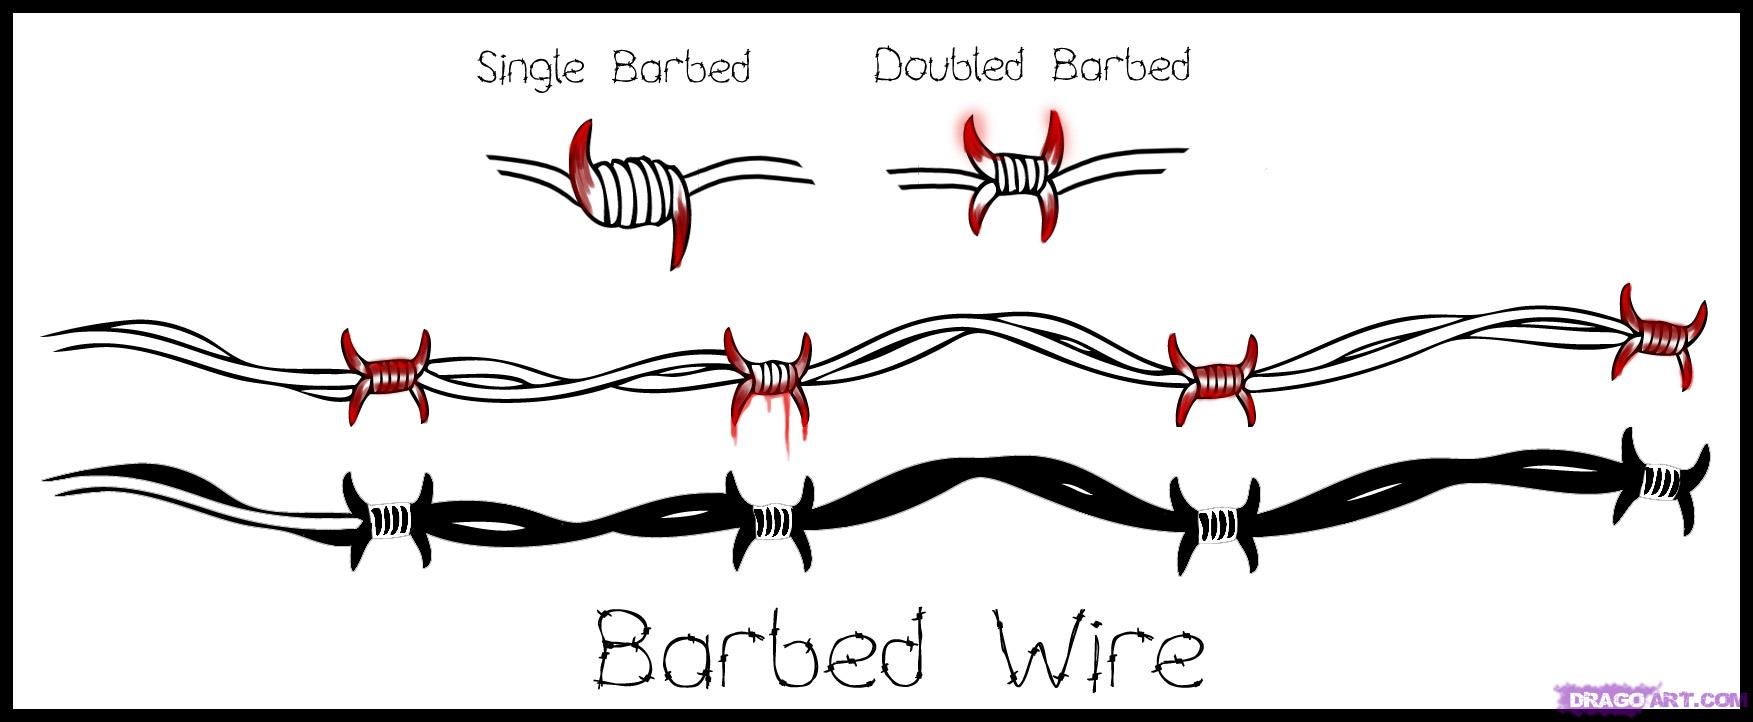 How To Draw Barbed Wire, Step By Step, Tattoos, Pop Culture, Free - Barbed Wire...